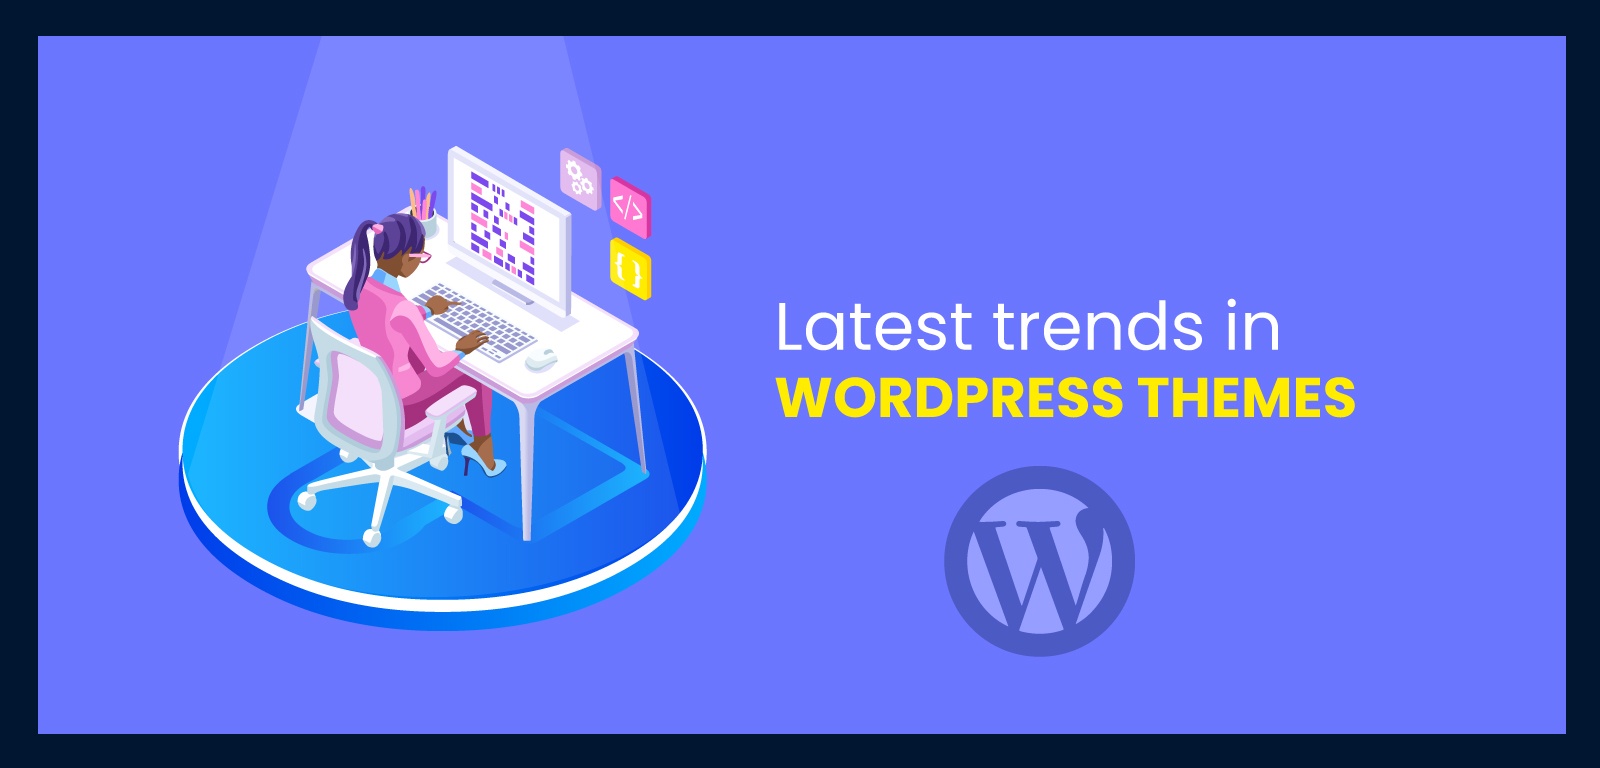 Latest trends in WordPress themes